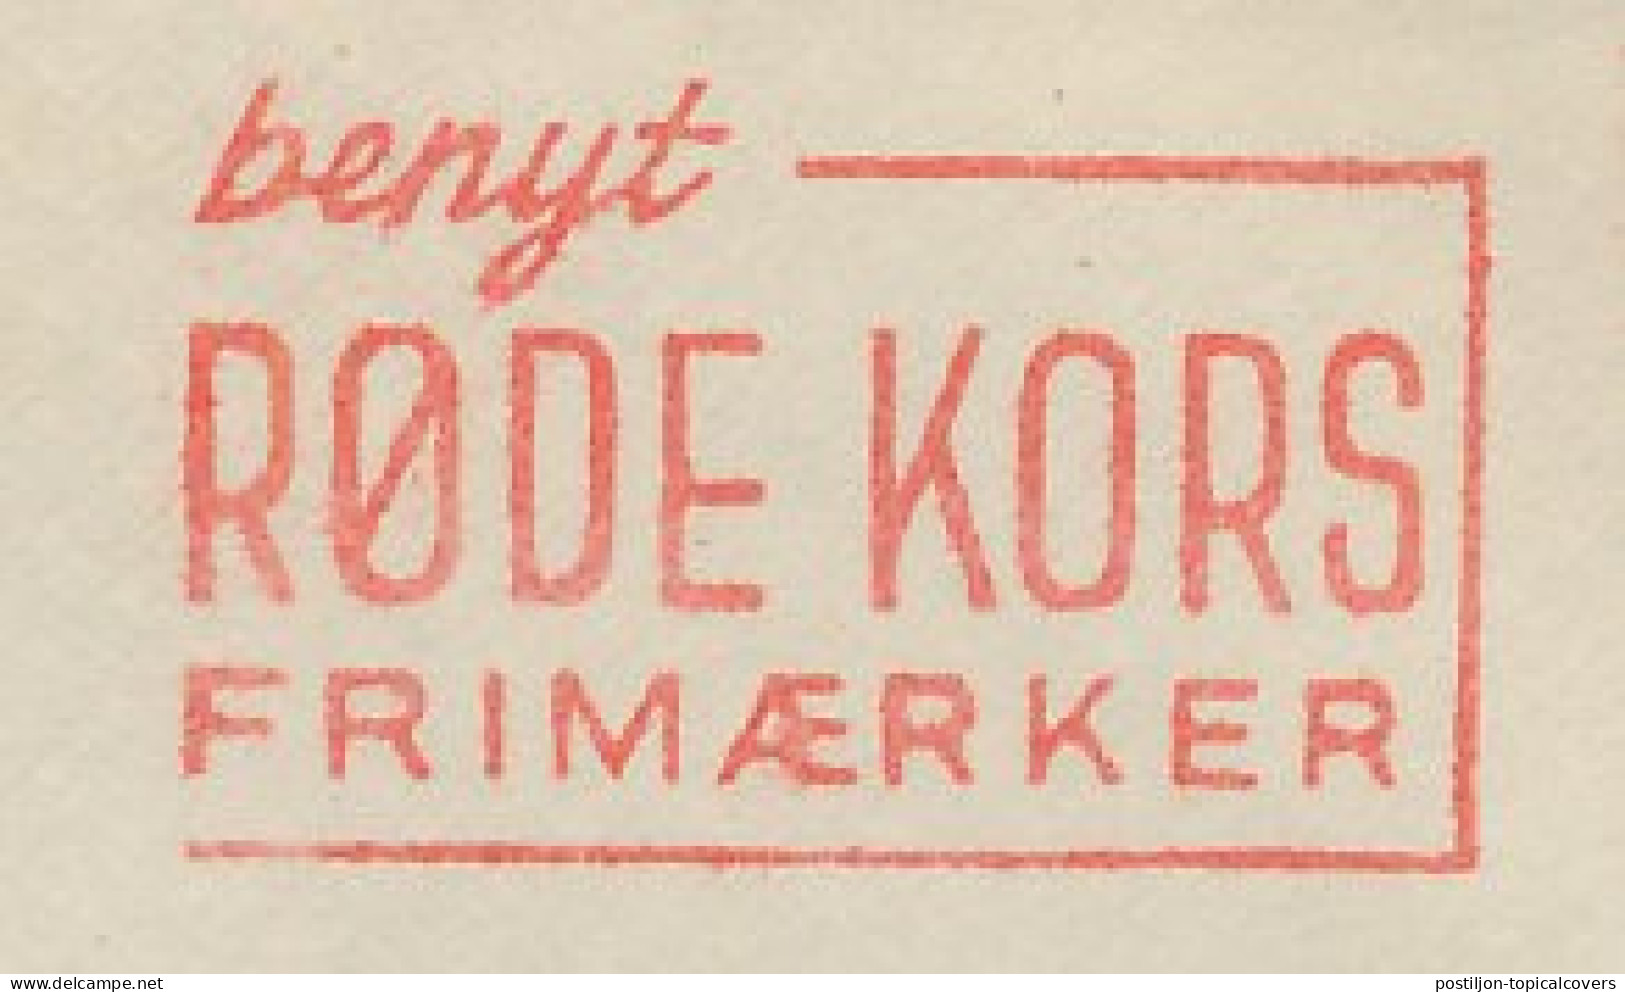 Meter Cover Denmark 1952 Red Cross Stamps - Croce Rossa